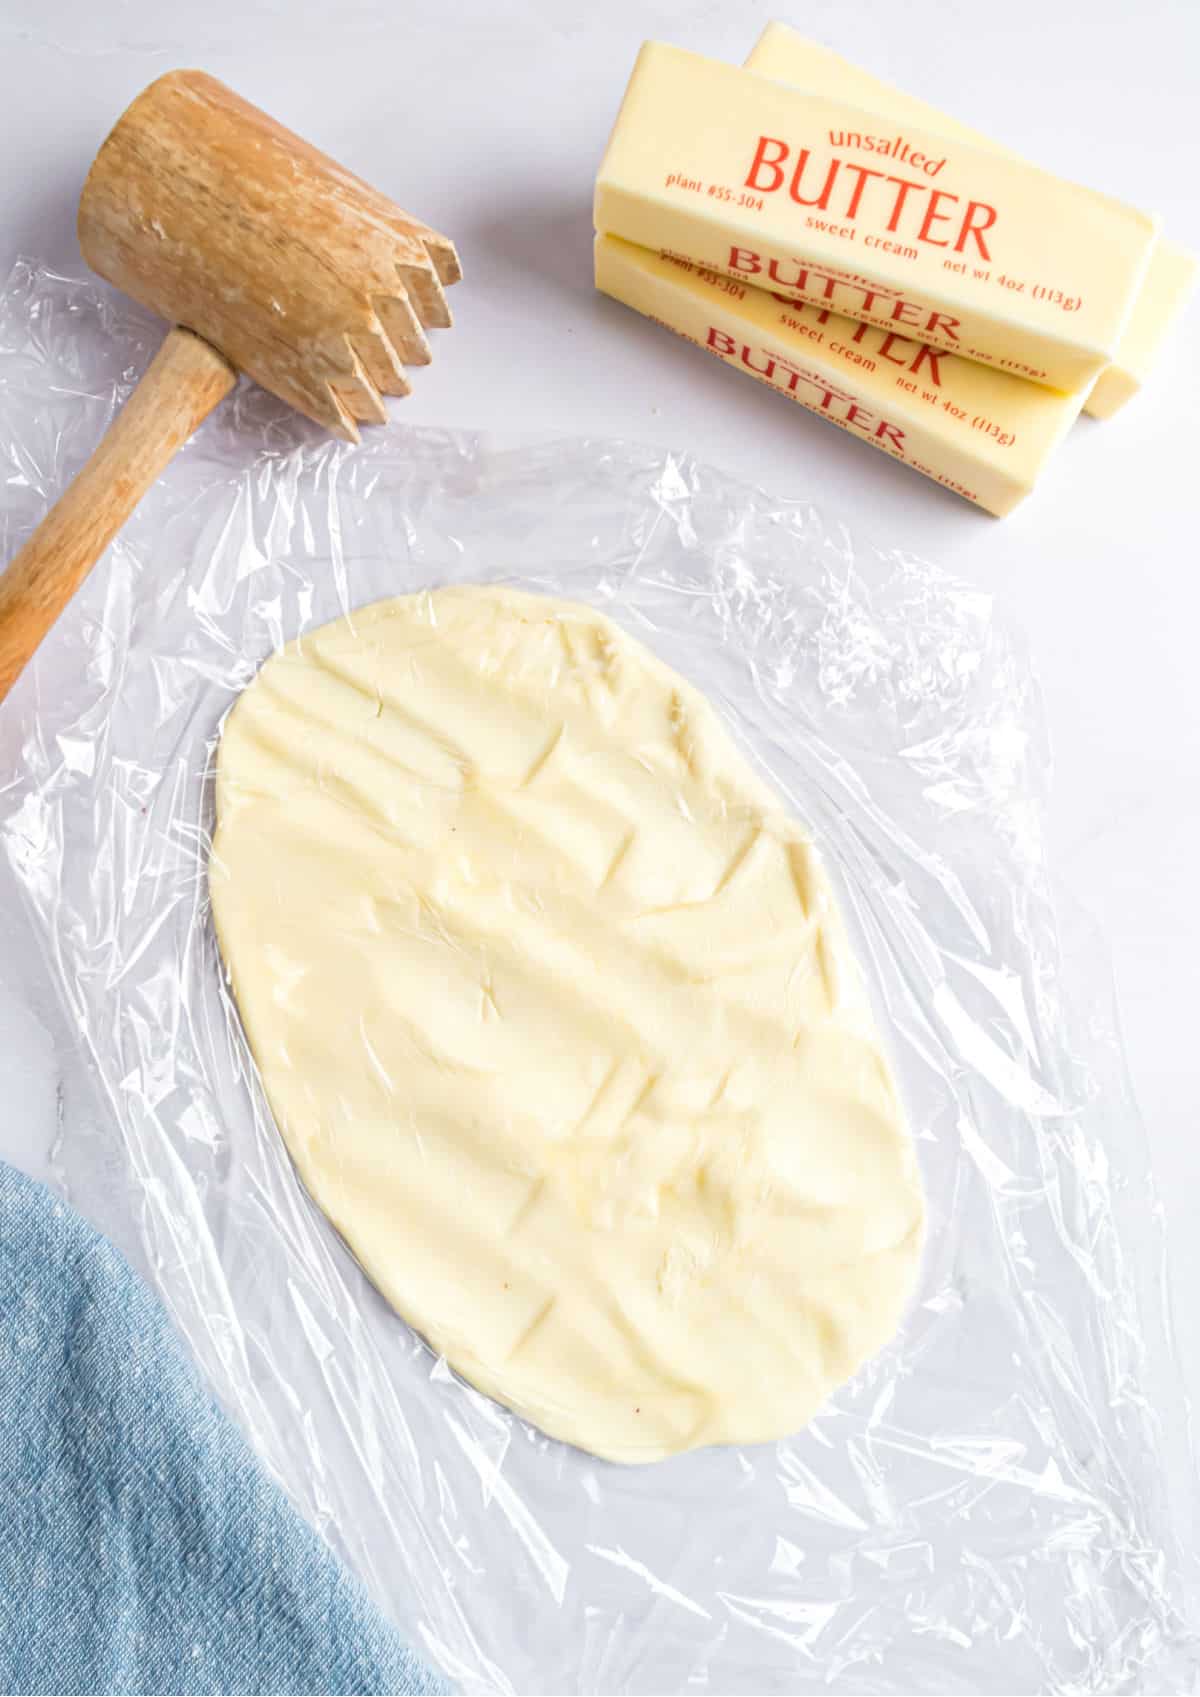 Butter pounded thin to soften quickly.